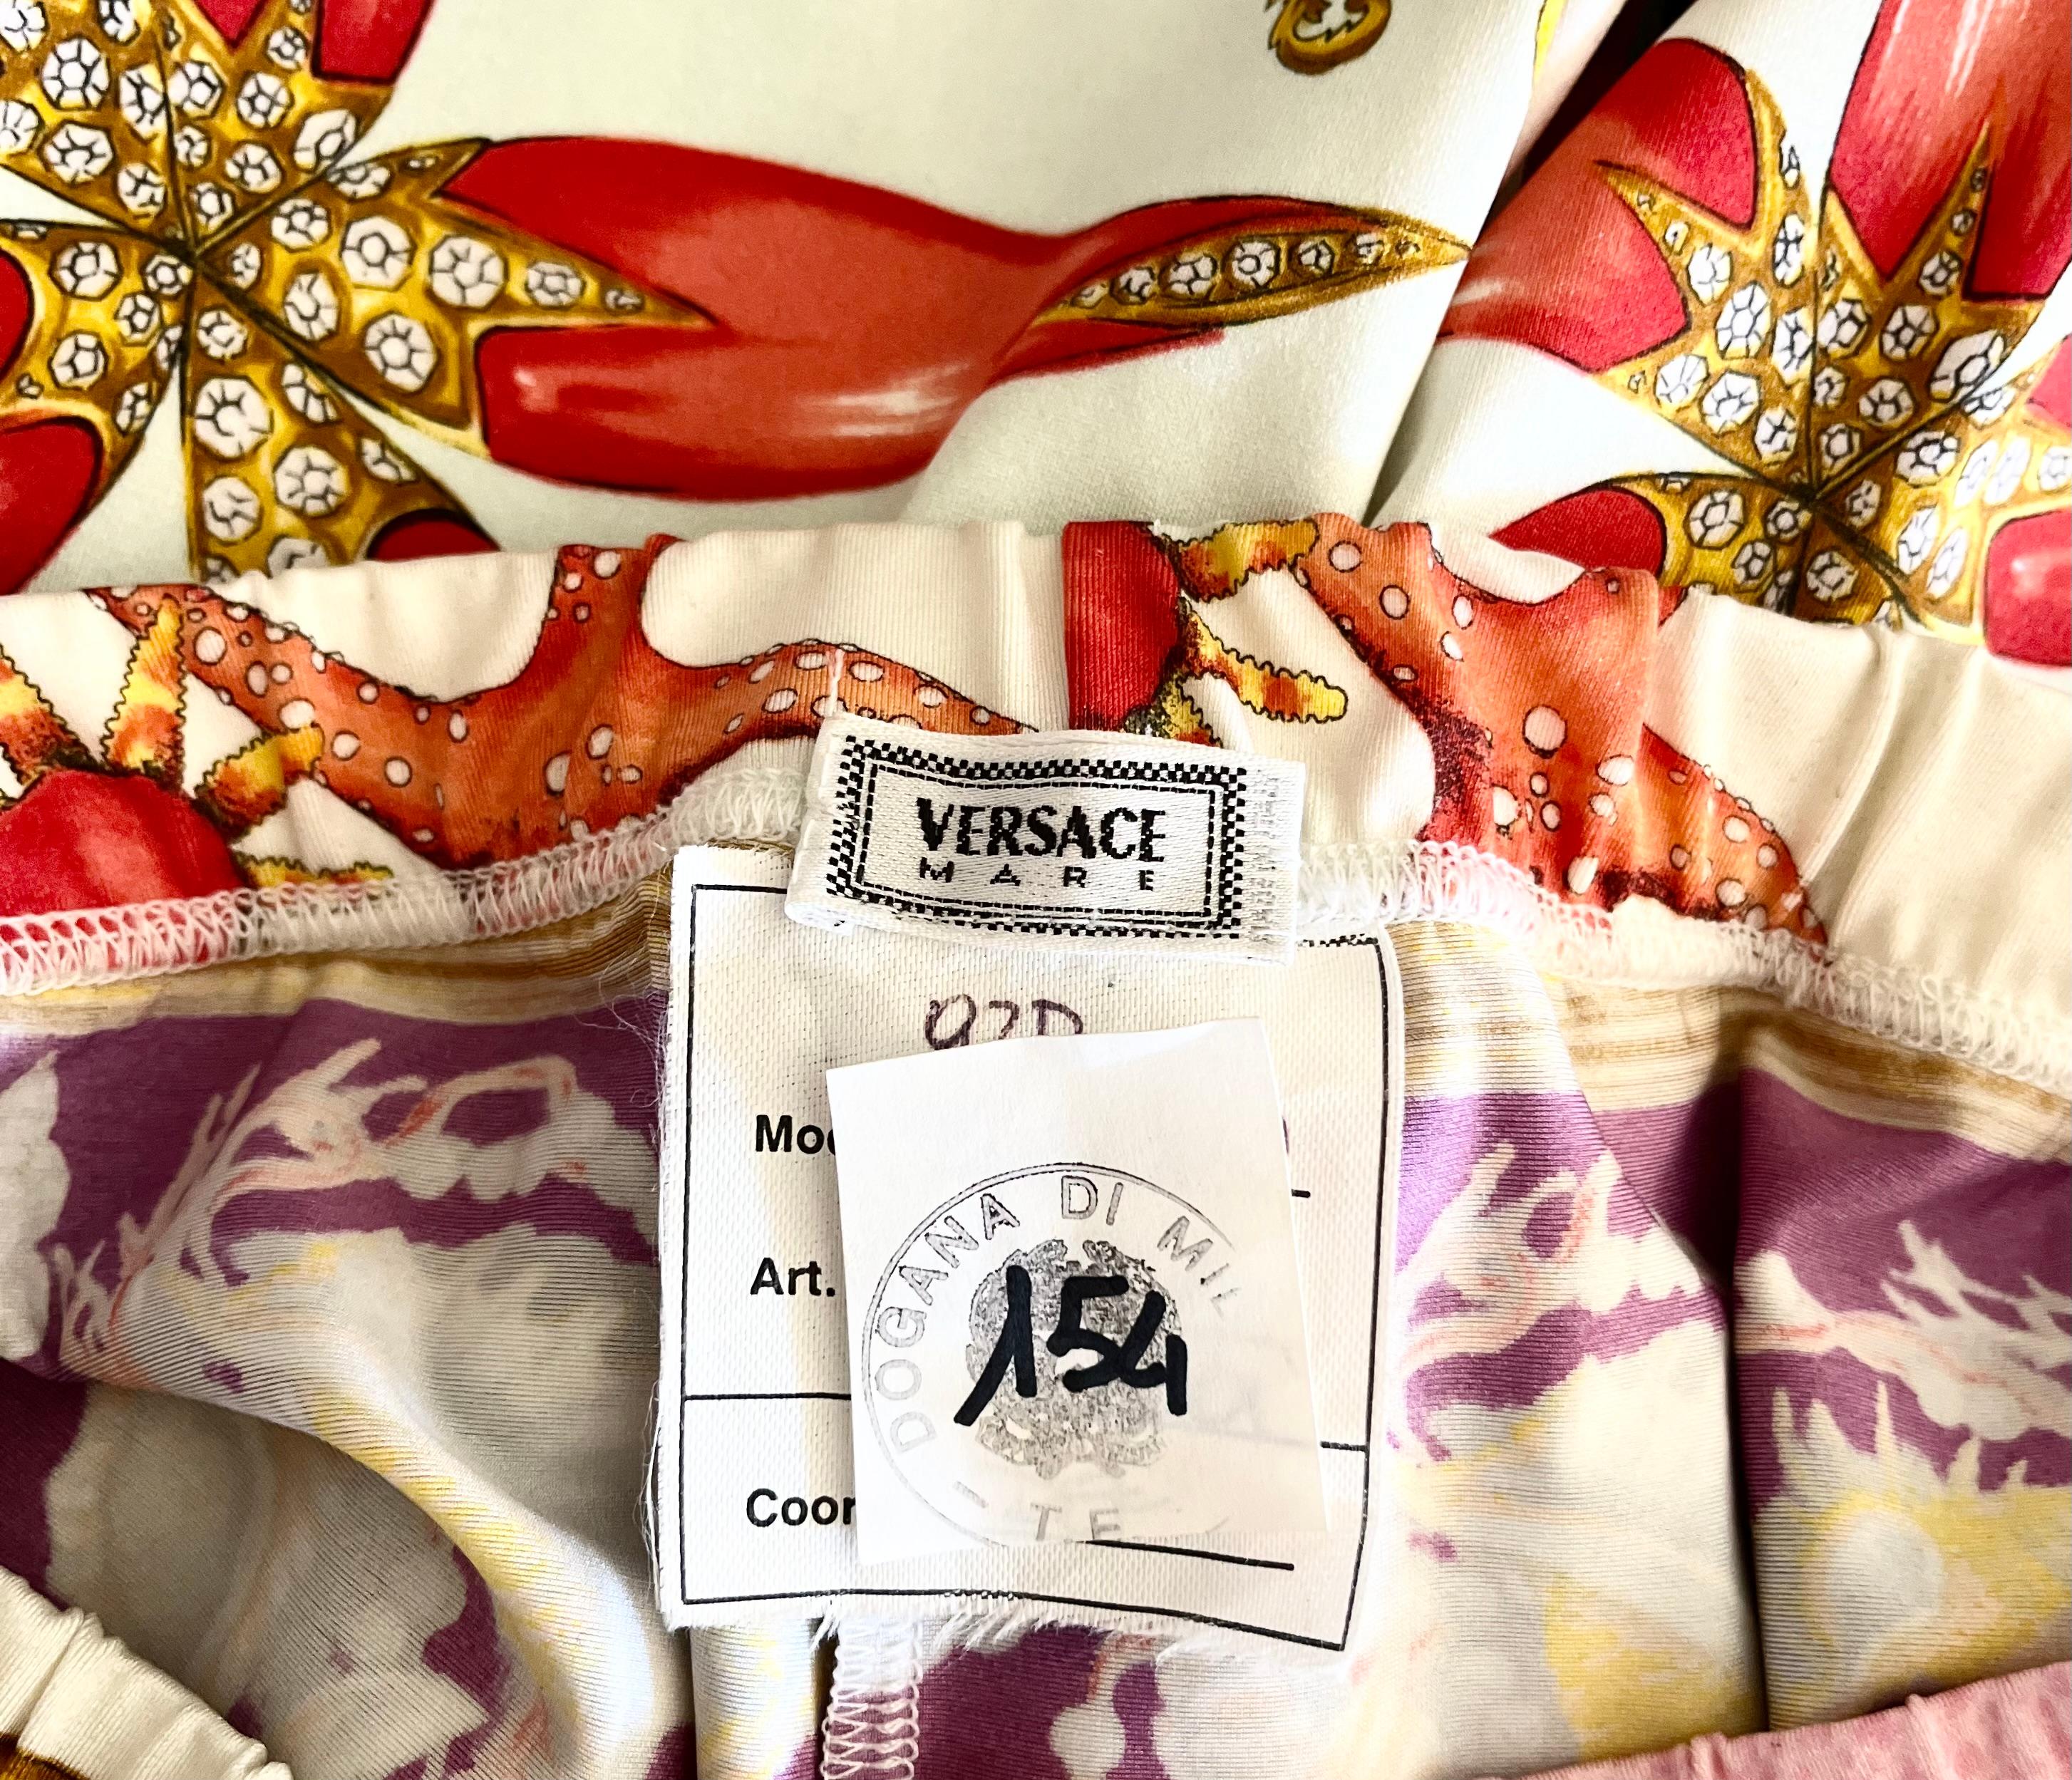 SEASHELL LEGGINGS from MIAMI MANSION GIANNI VERSACE PERSONAL COLLECTION For Sale 3